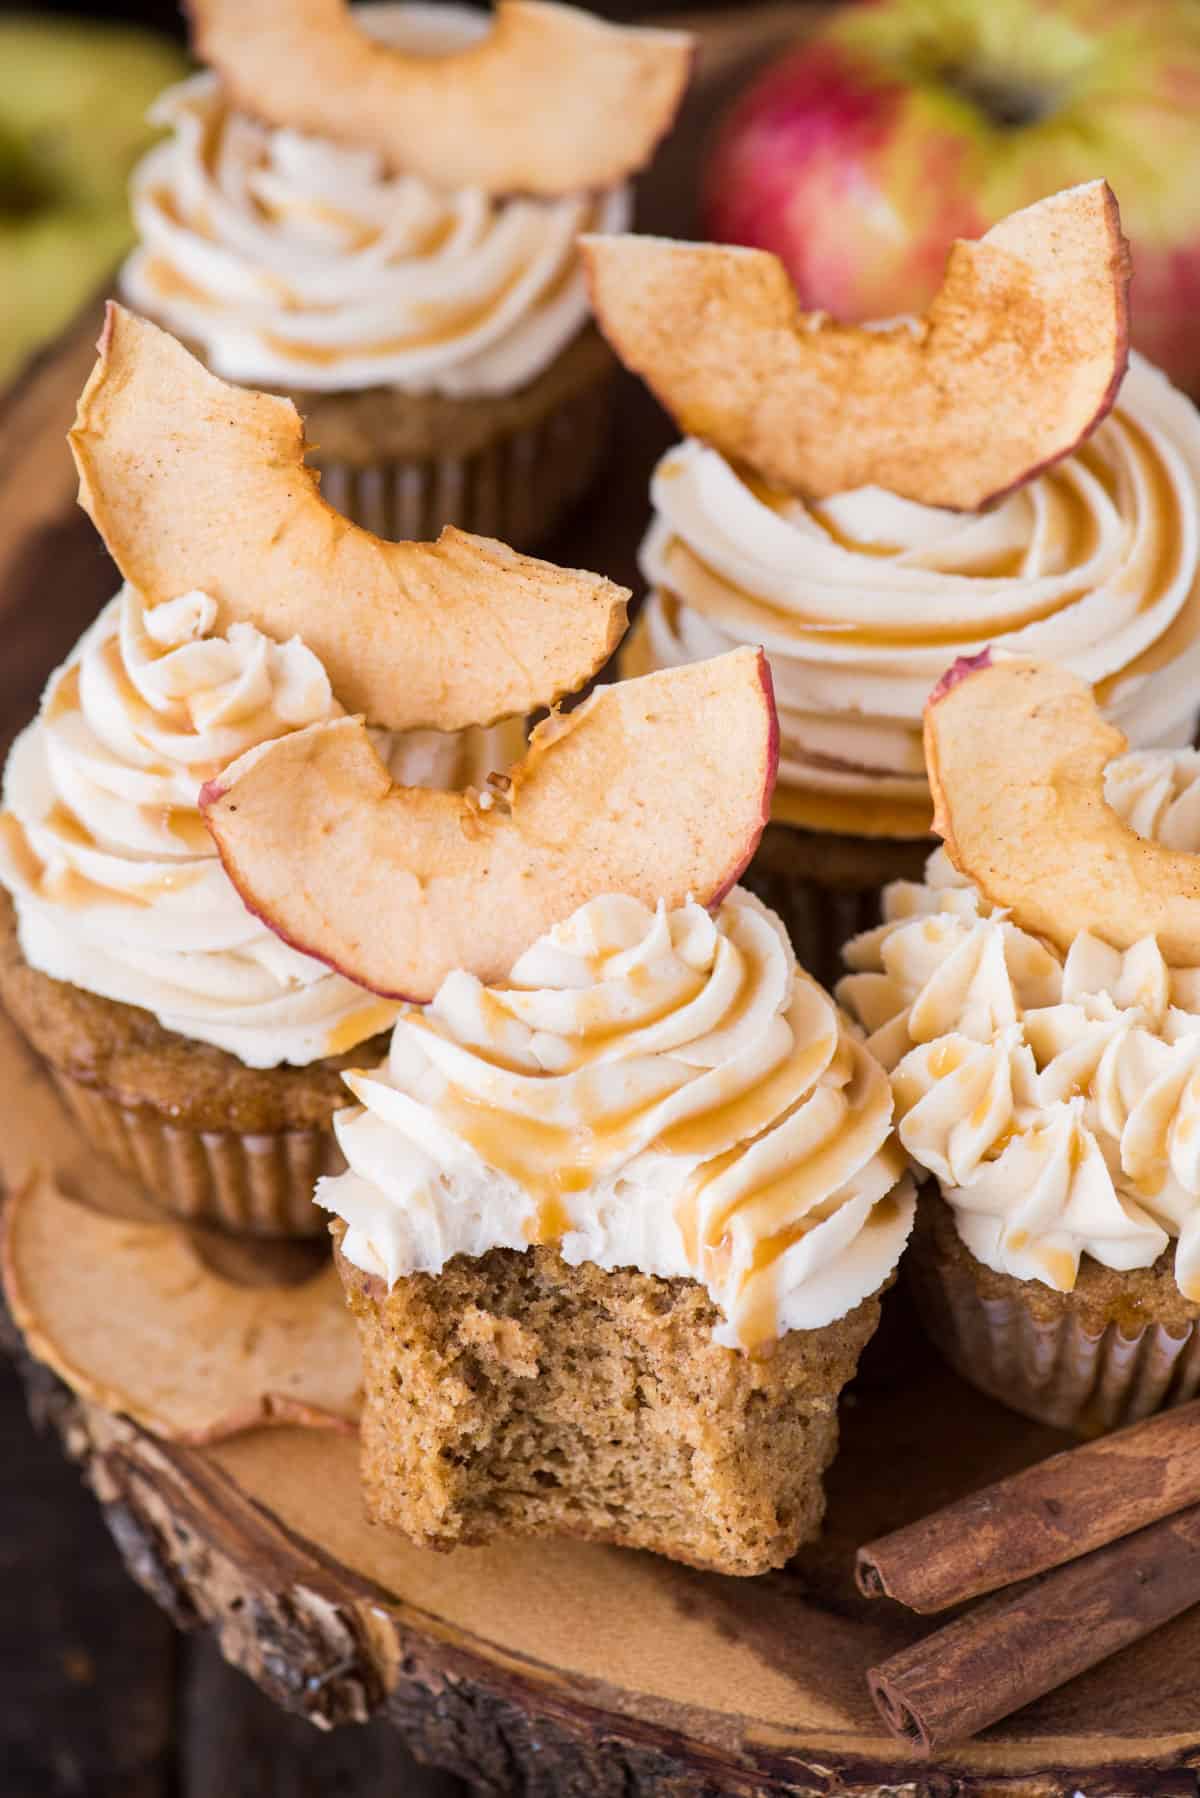 apple spice cupcakes with caramel frosting and apple chips on wood cake stand with wood background